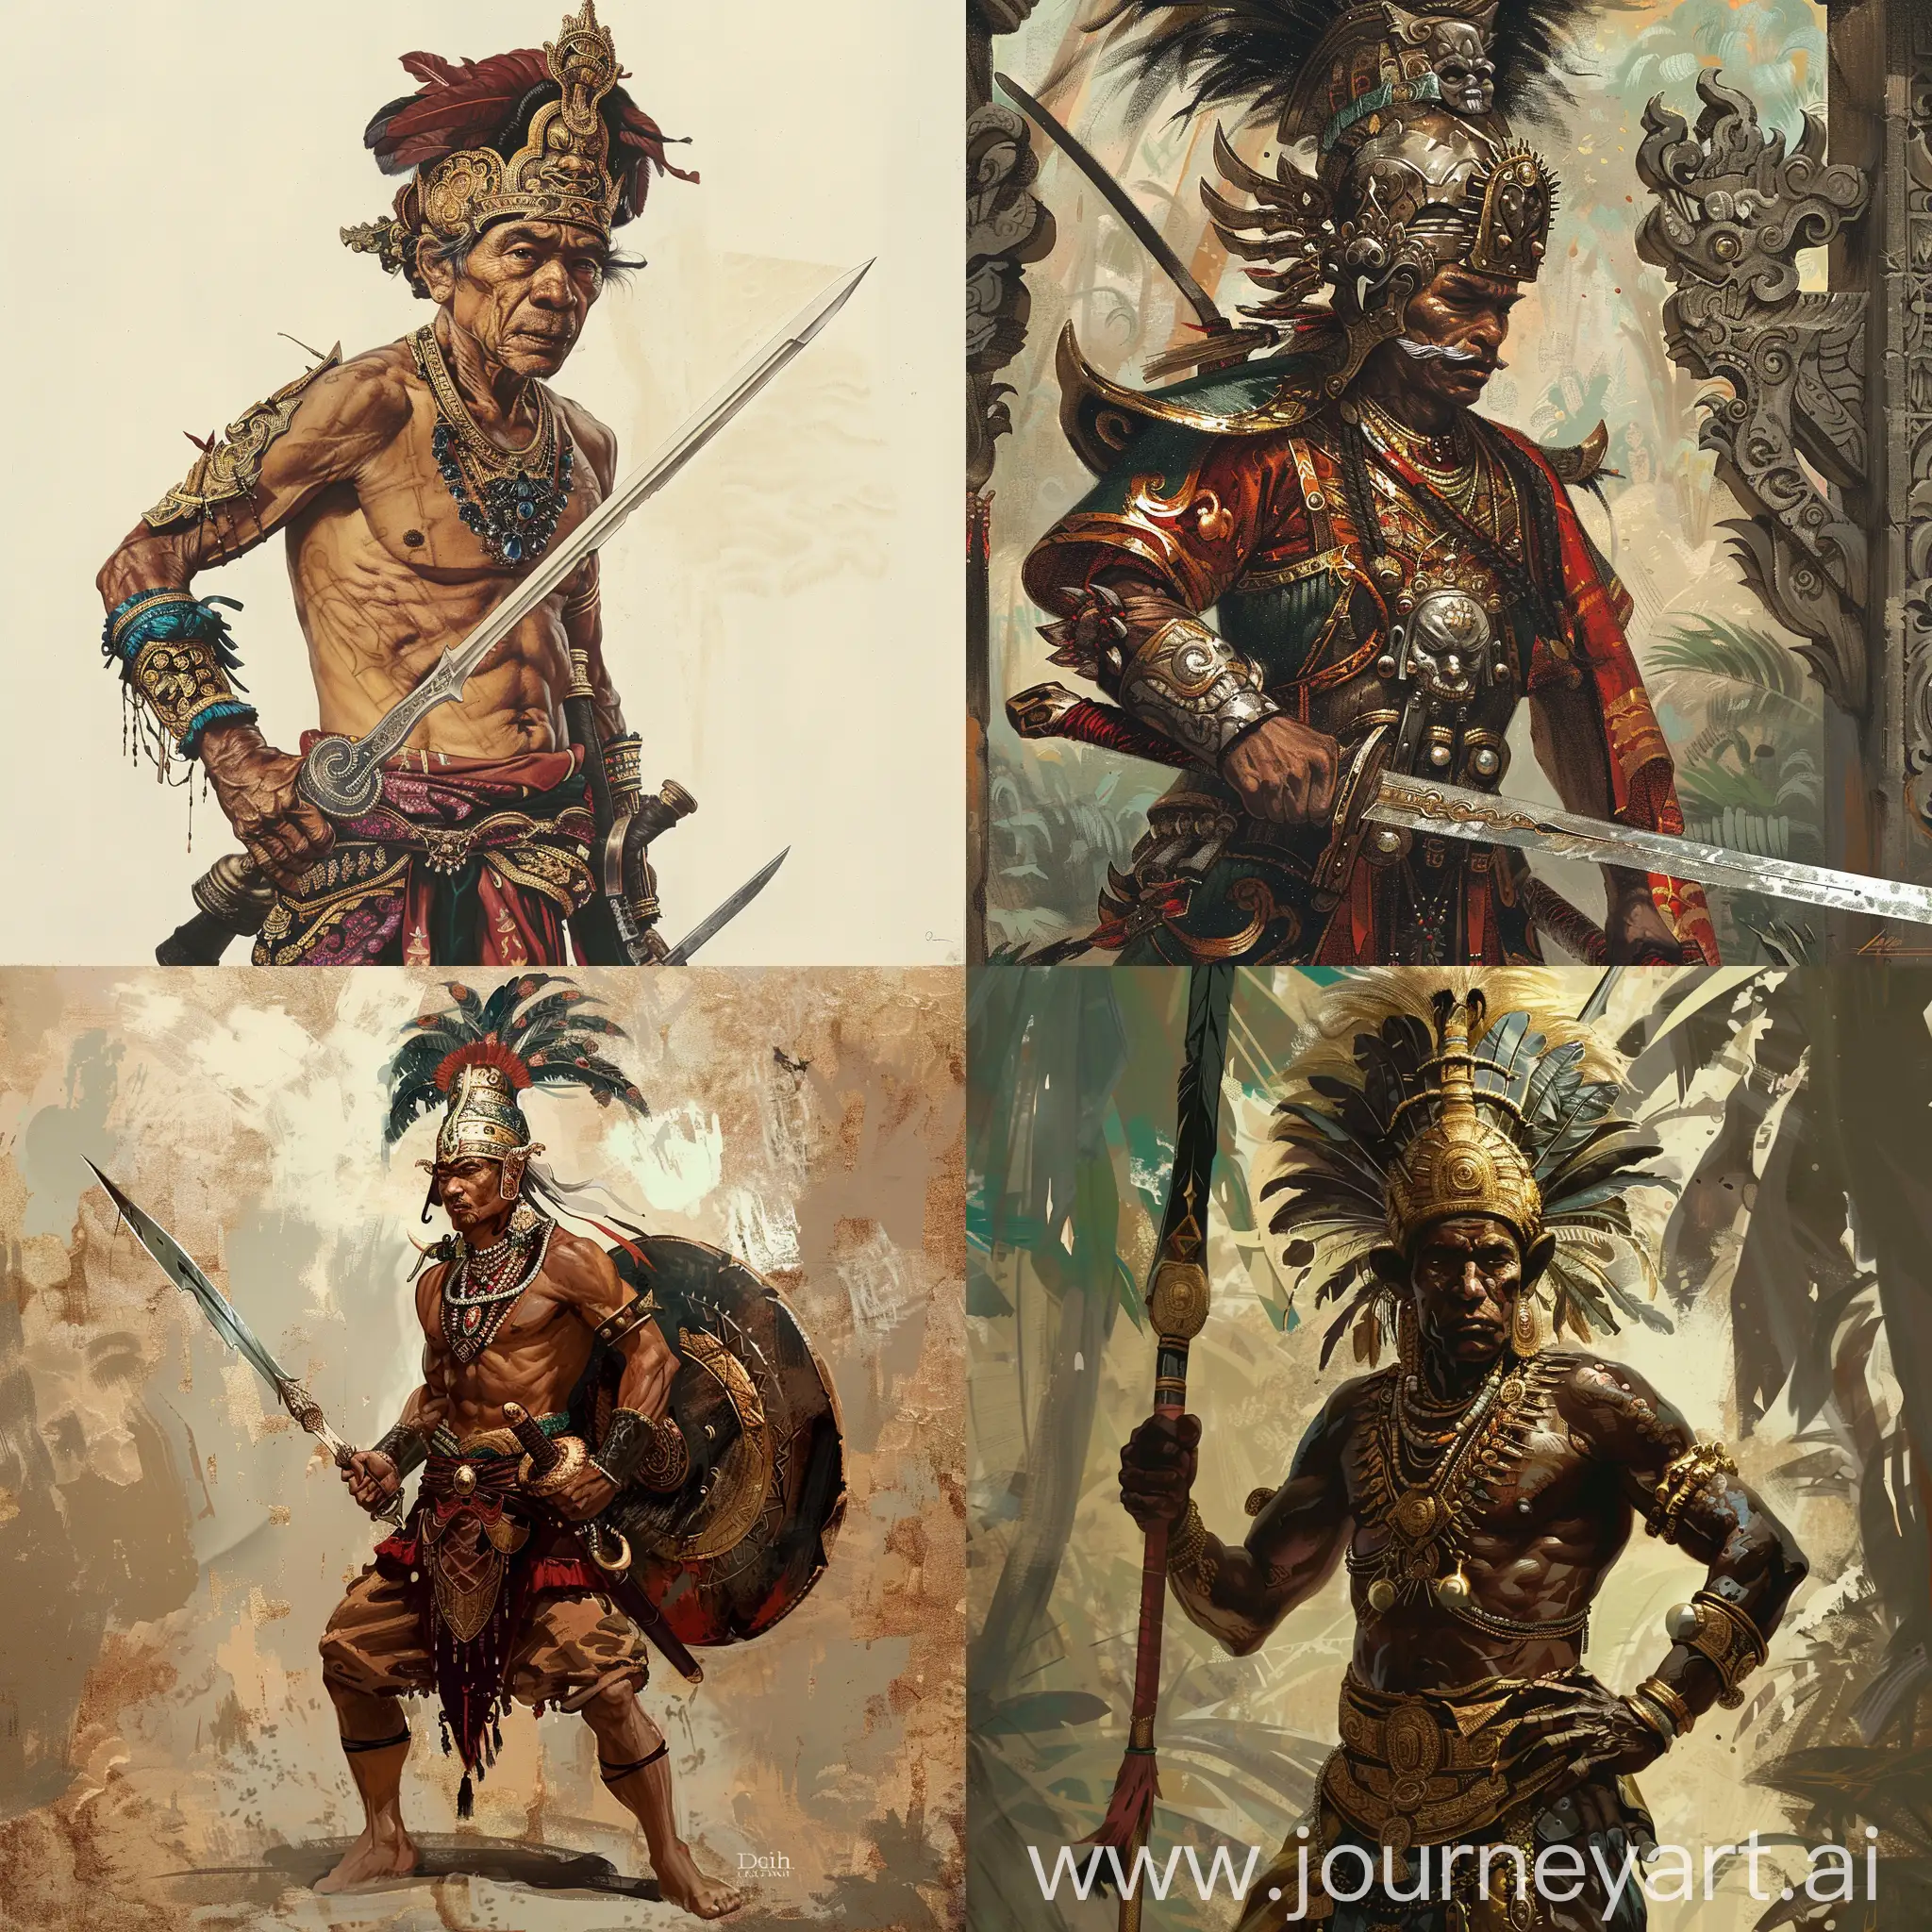 Javanese-Warrior-in-Exquisite-Armor-Captivating-Visual-of-Tradition-and-Strength